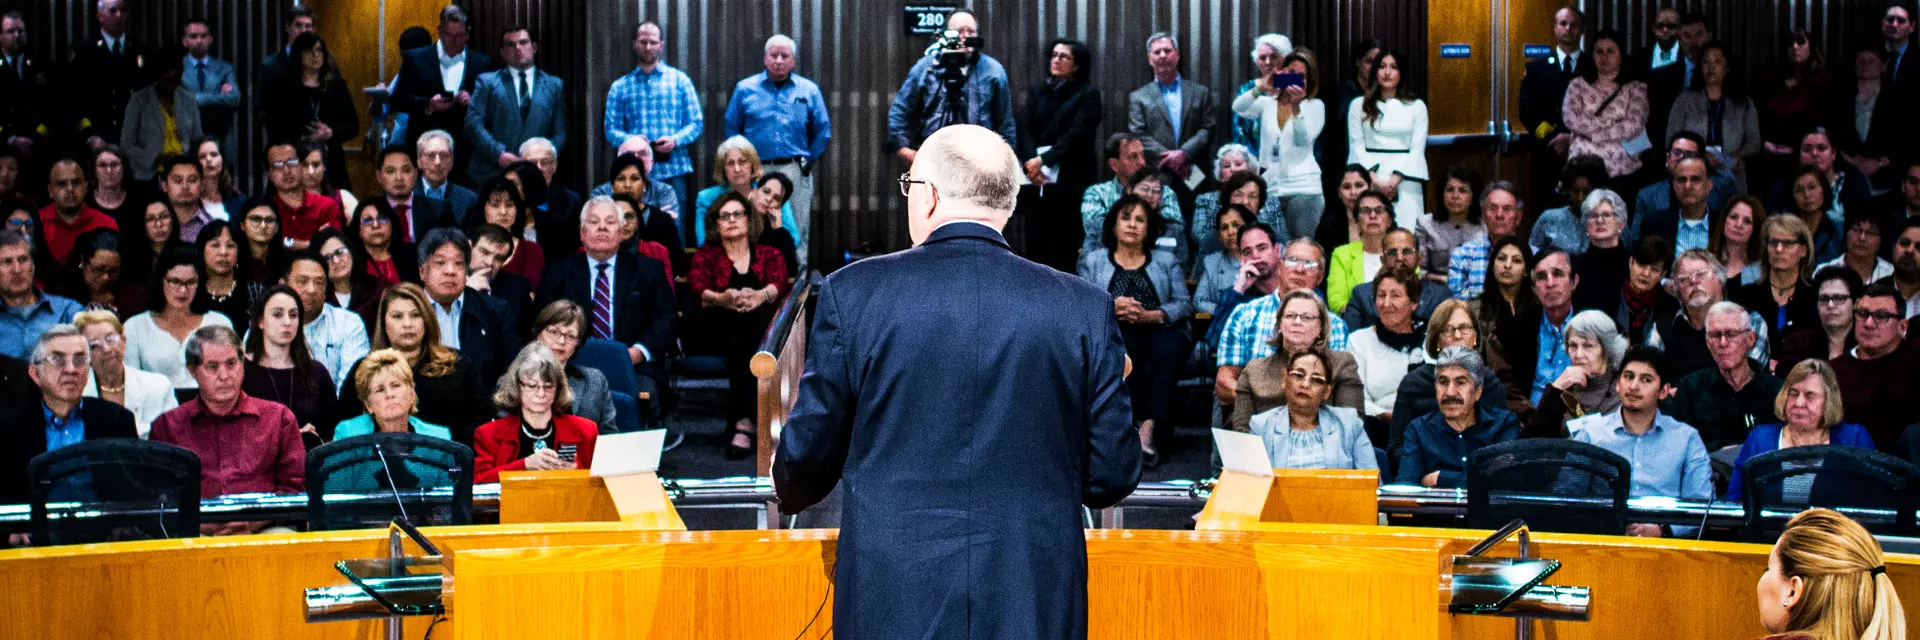 Joe speaking before the public during a Board of Supervisors meeting.